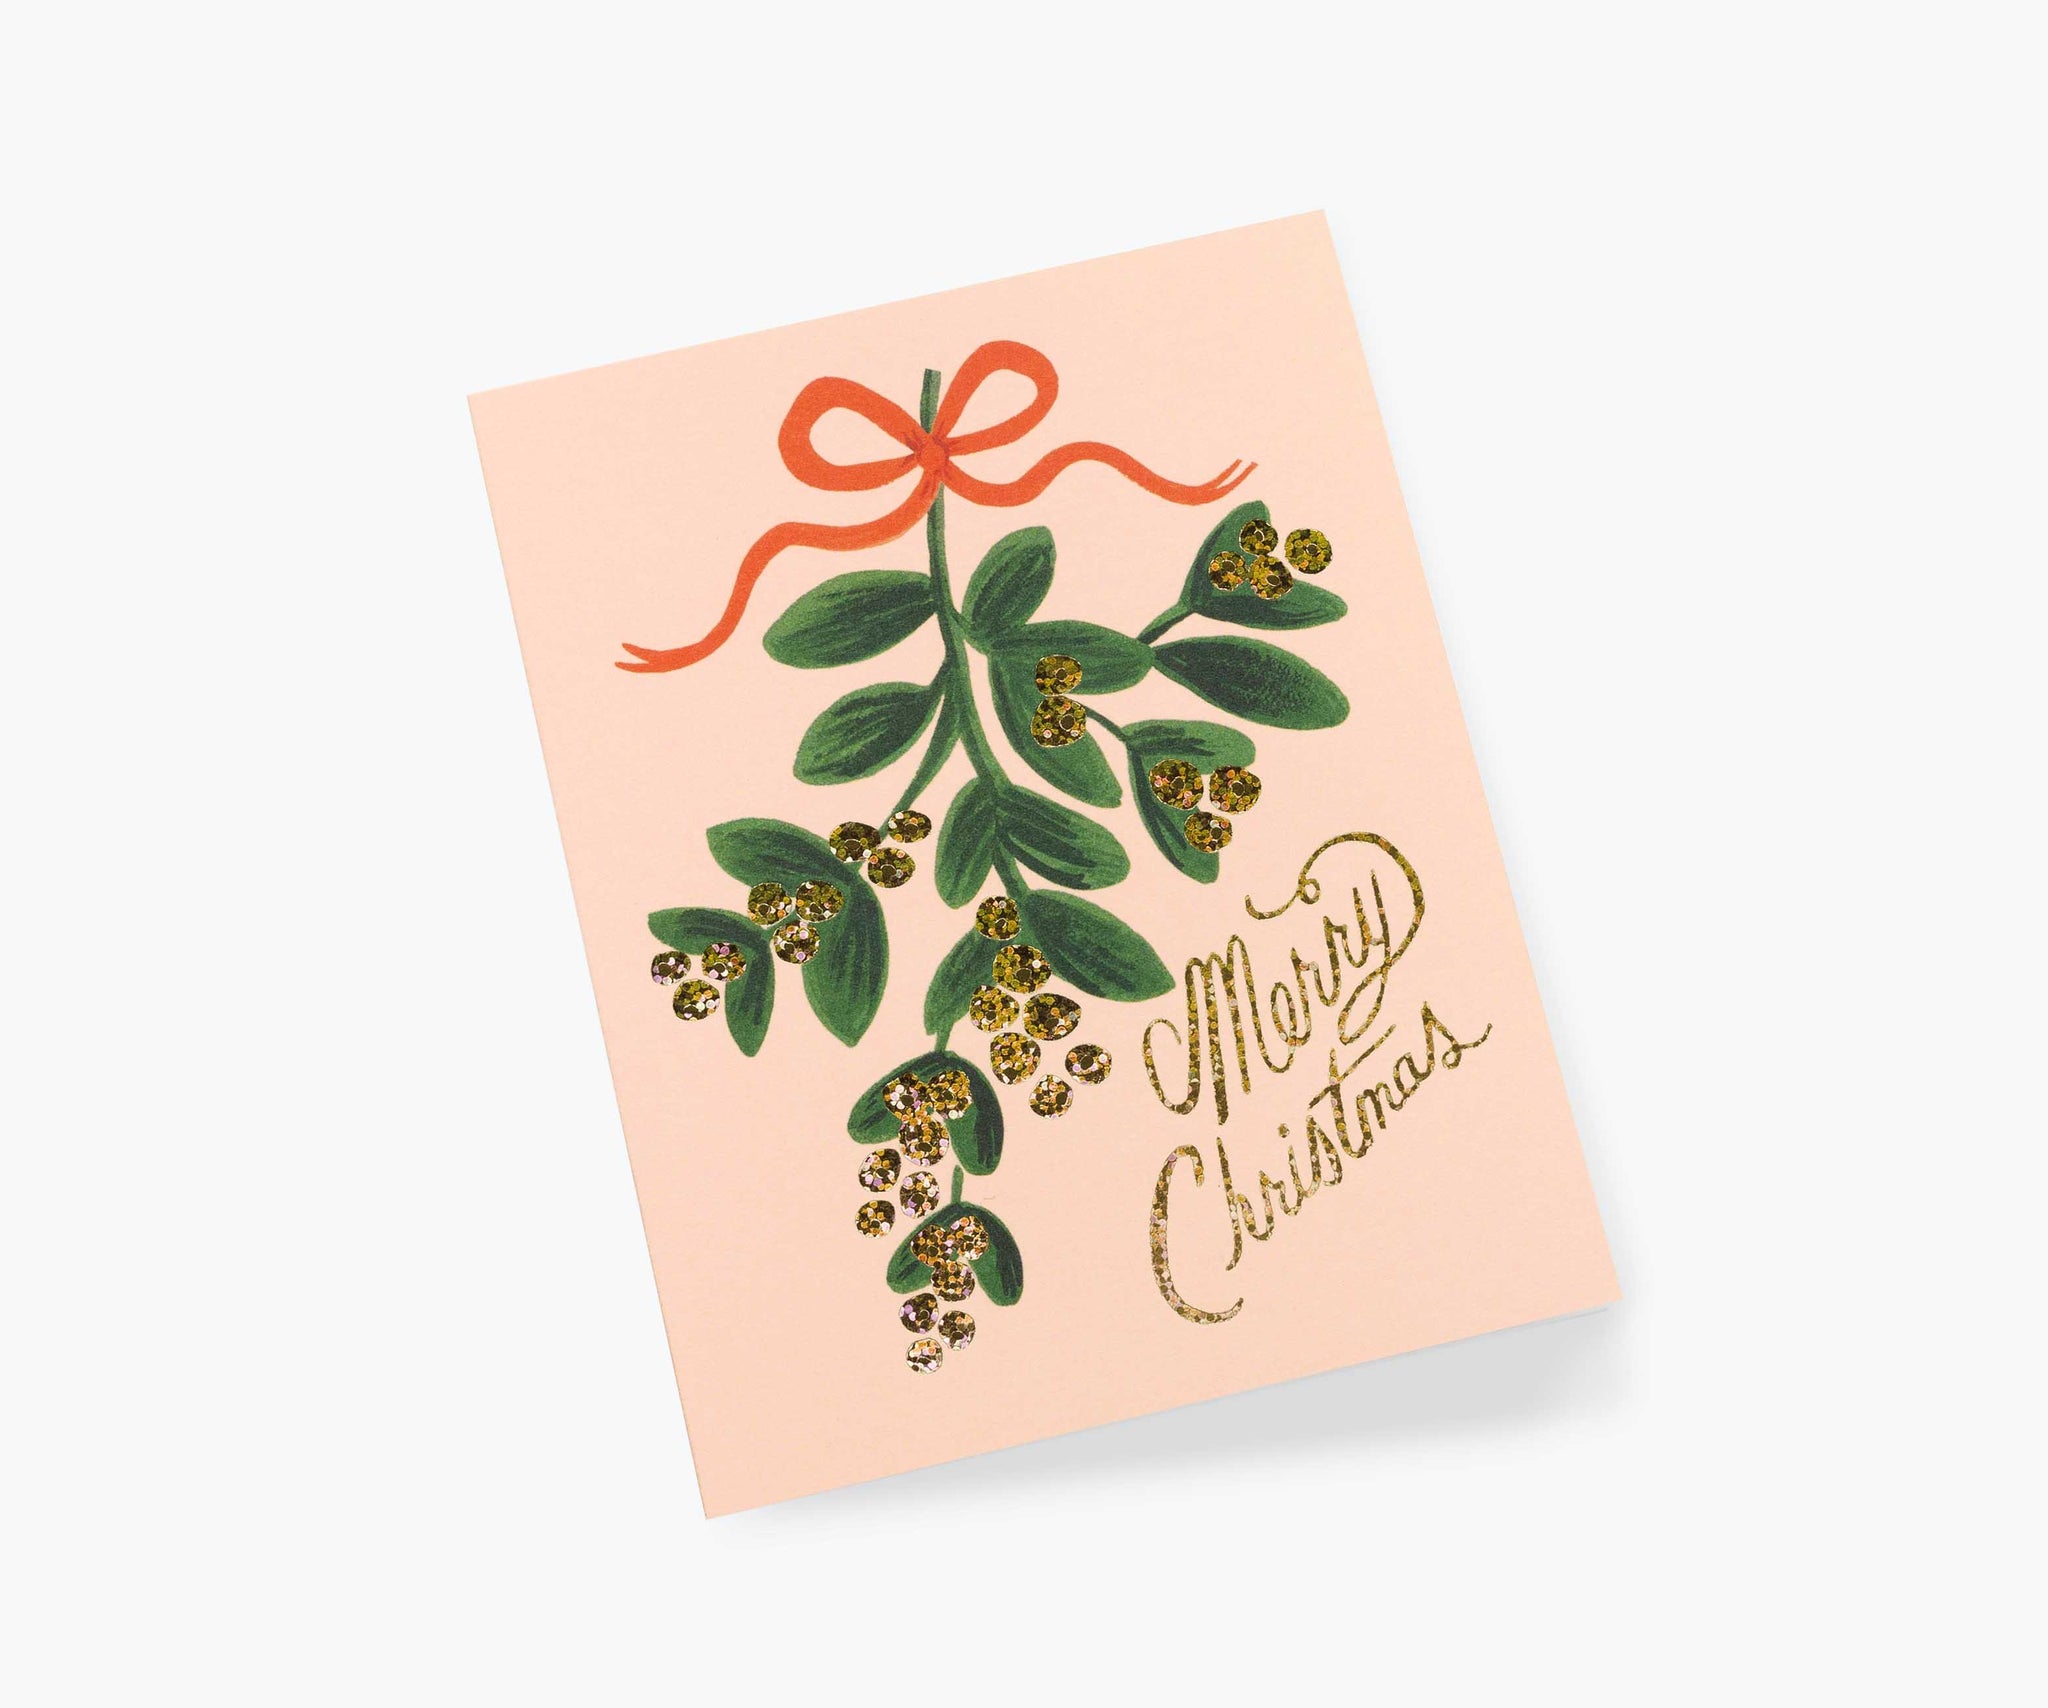 Send season’s greetings to family and friends with our festive holiday cards. A blank interior lets your handwritten note take center stage.